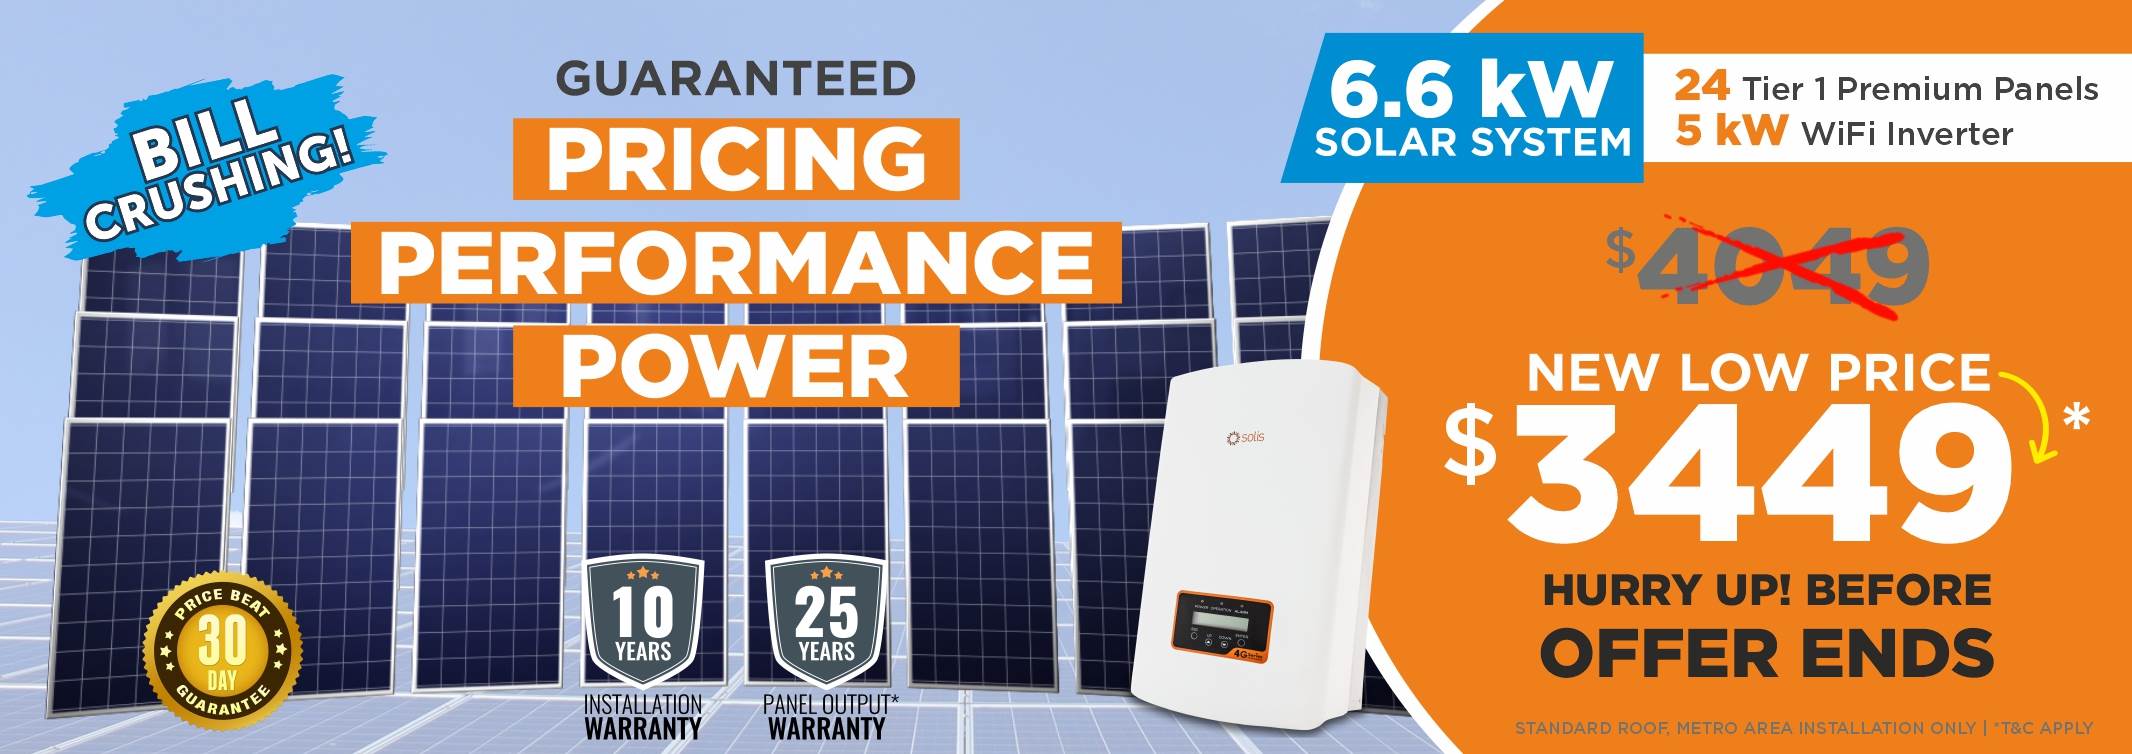 Solar Panel Offer At New South Wales